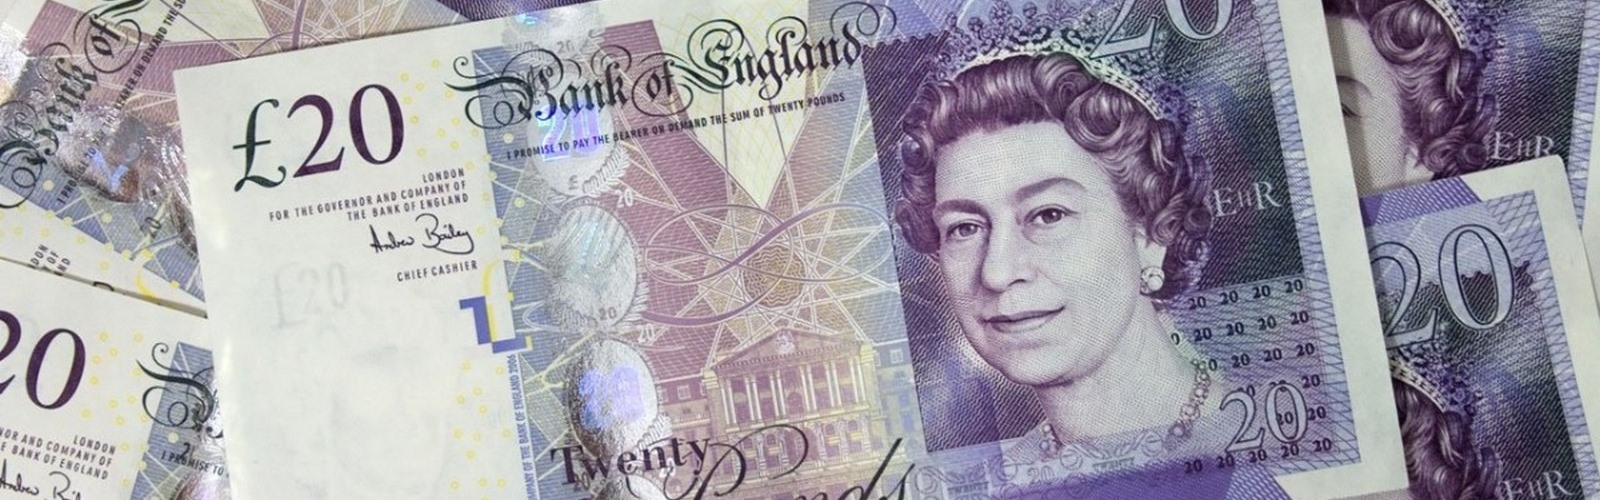 Buy Counterfeit Pound Sterling